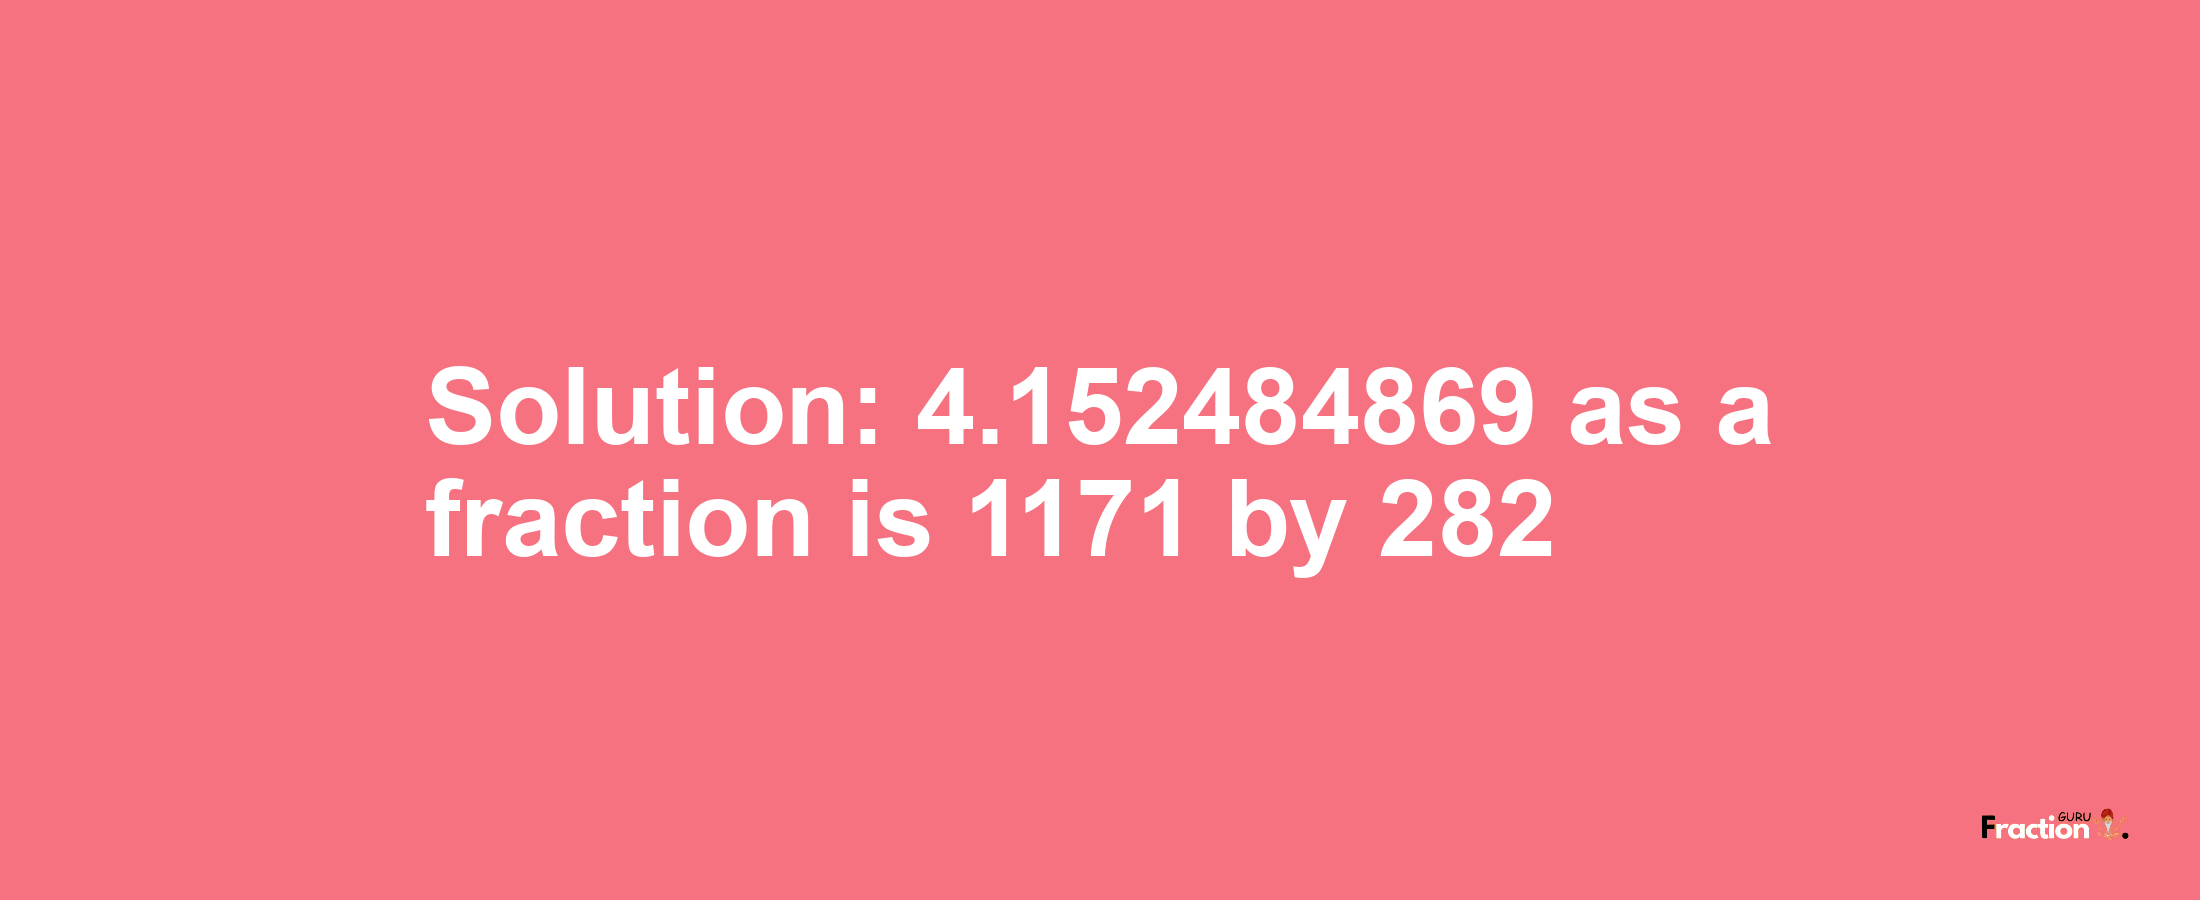 Solution:4.152484869 as a fraction is 1171/282